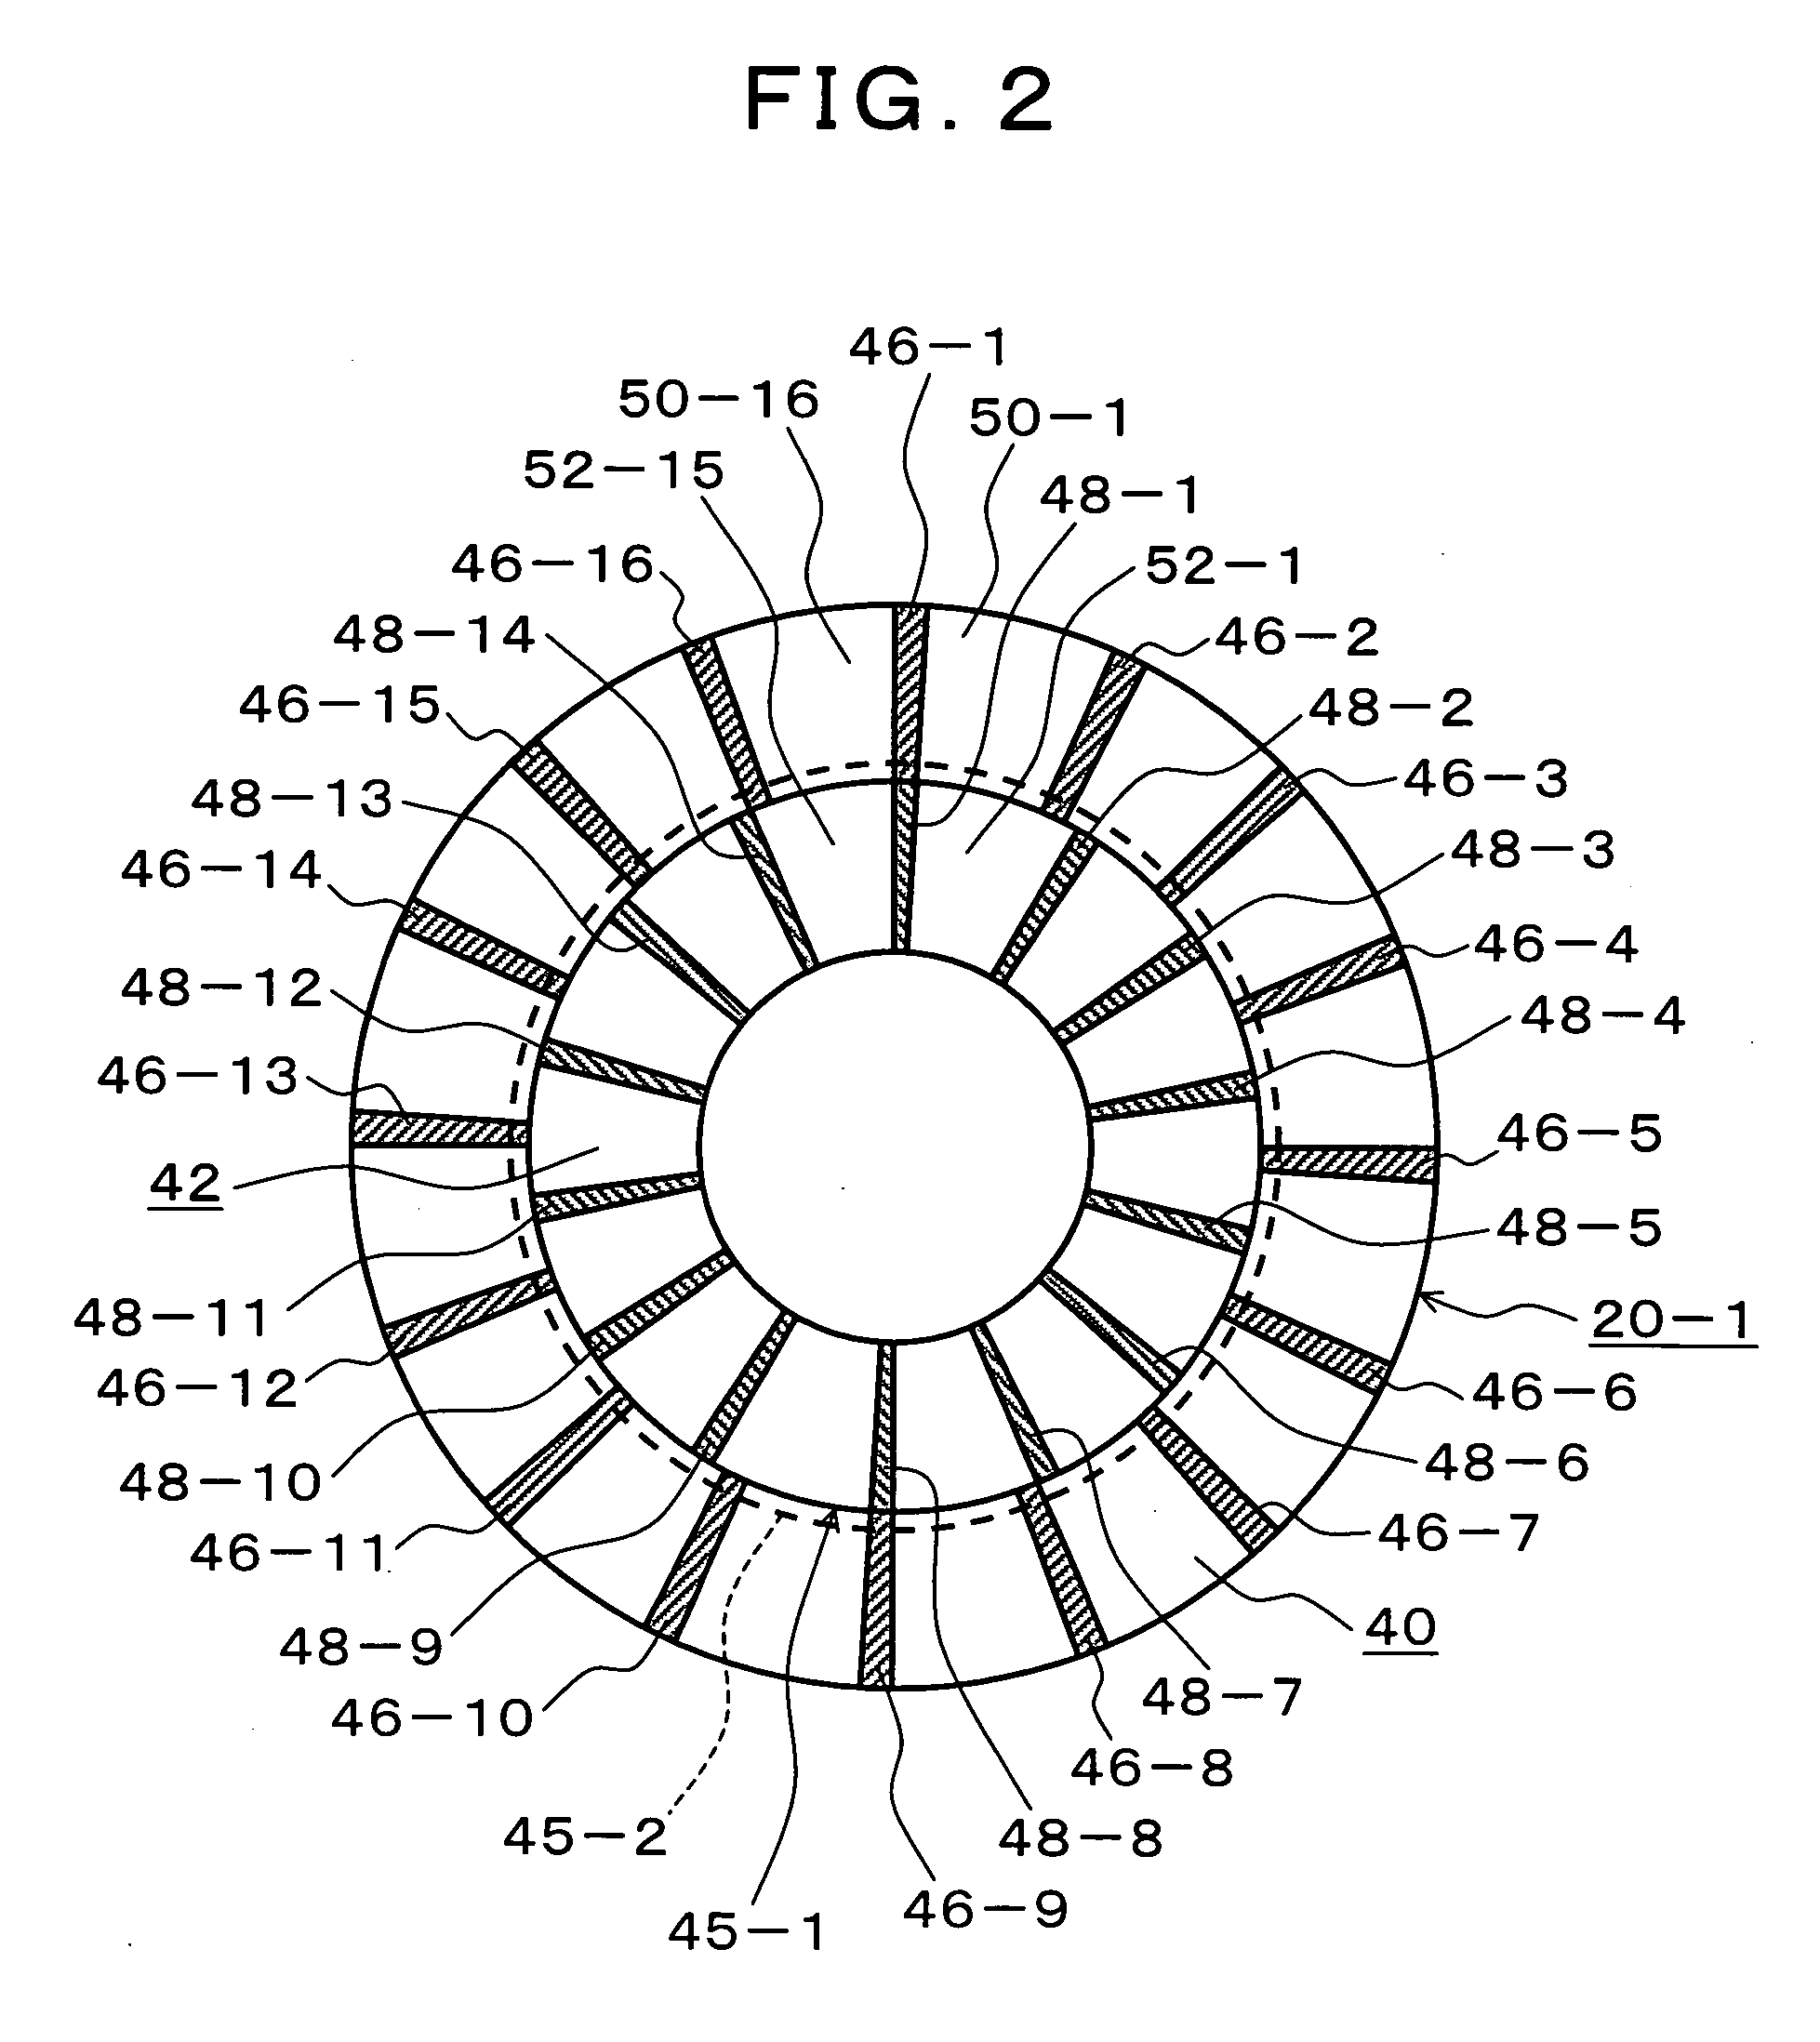 Information storage apparatus, and control method and program for the same